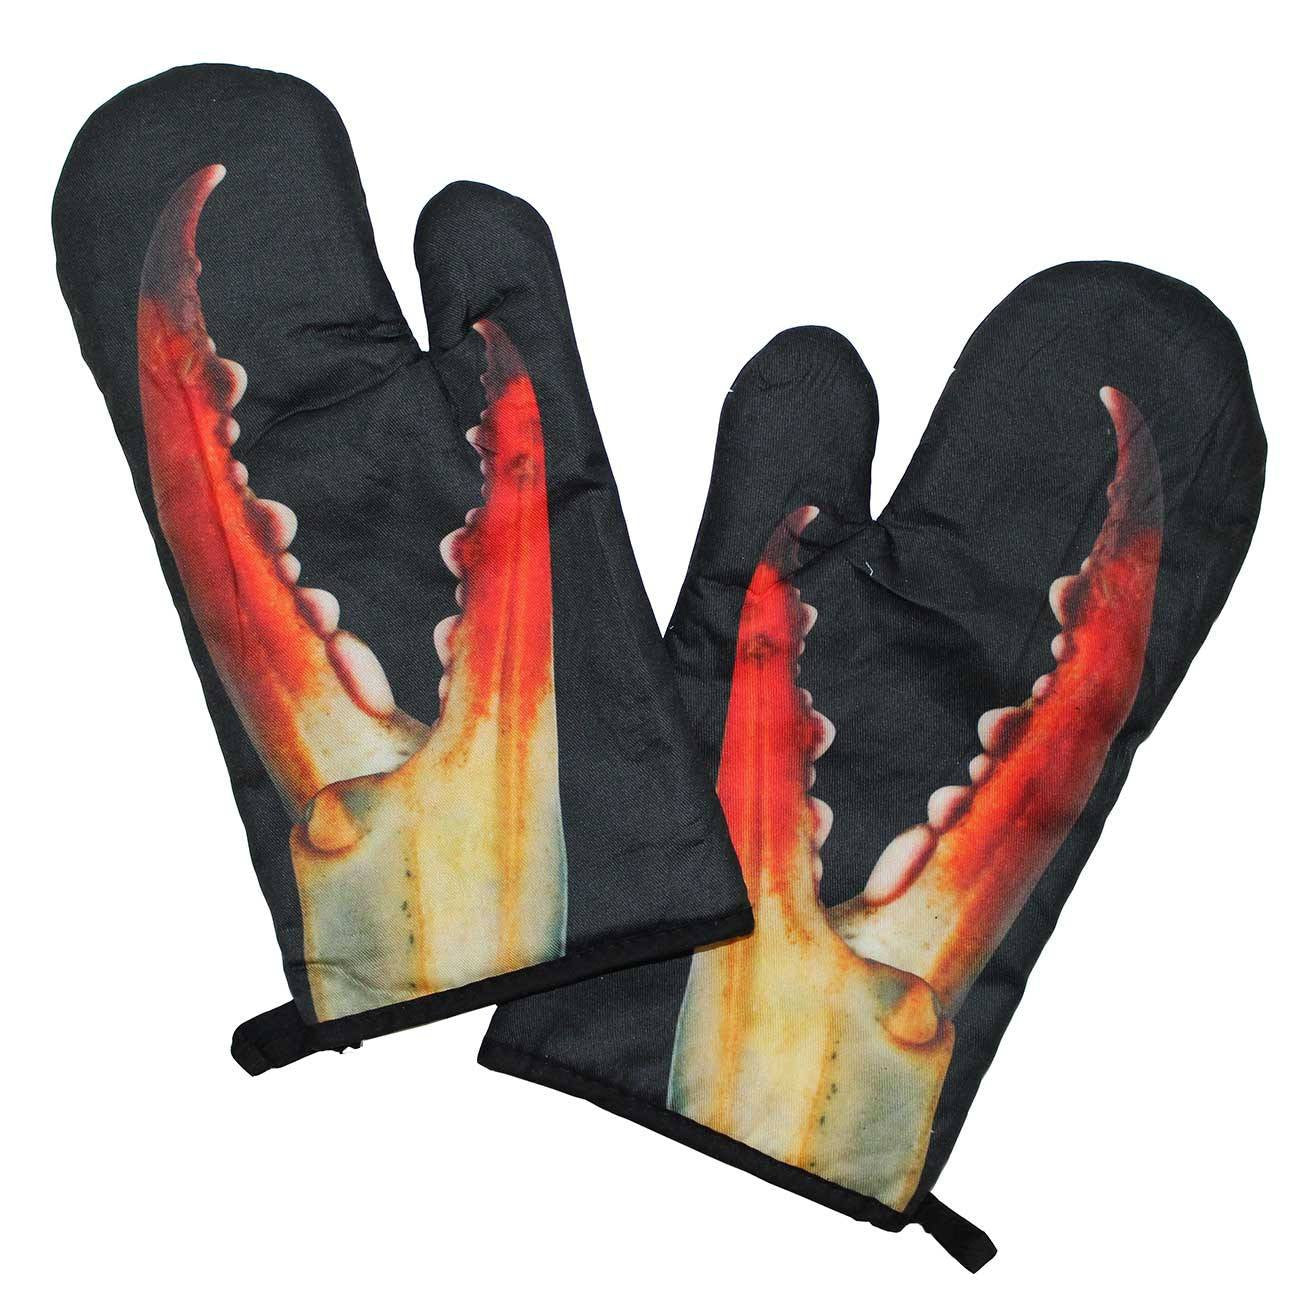 Lobster Claw Oven Mitts for Oven Cooking Cotton Lining Claw Gloves